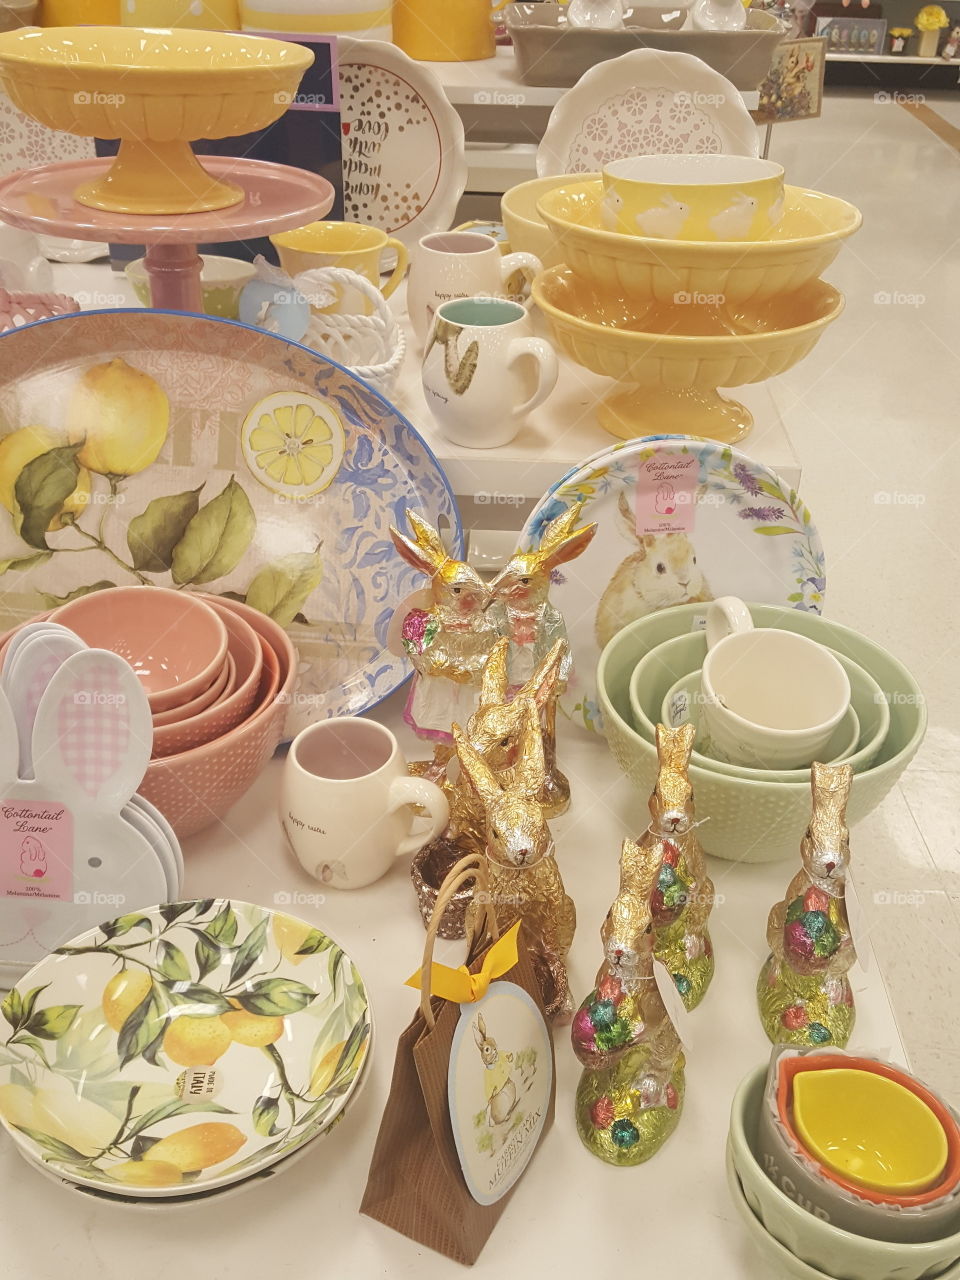 I  was shopping for some dishes and I come across these beautiful pieces for Easter which is my second favorite season.